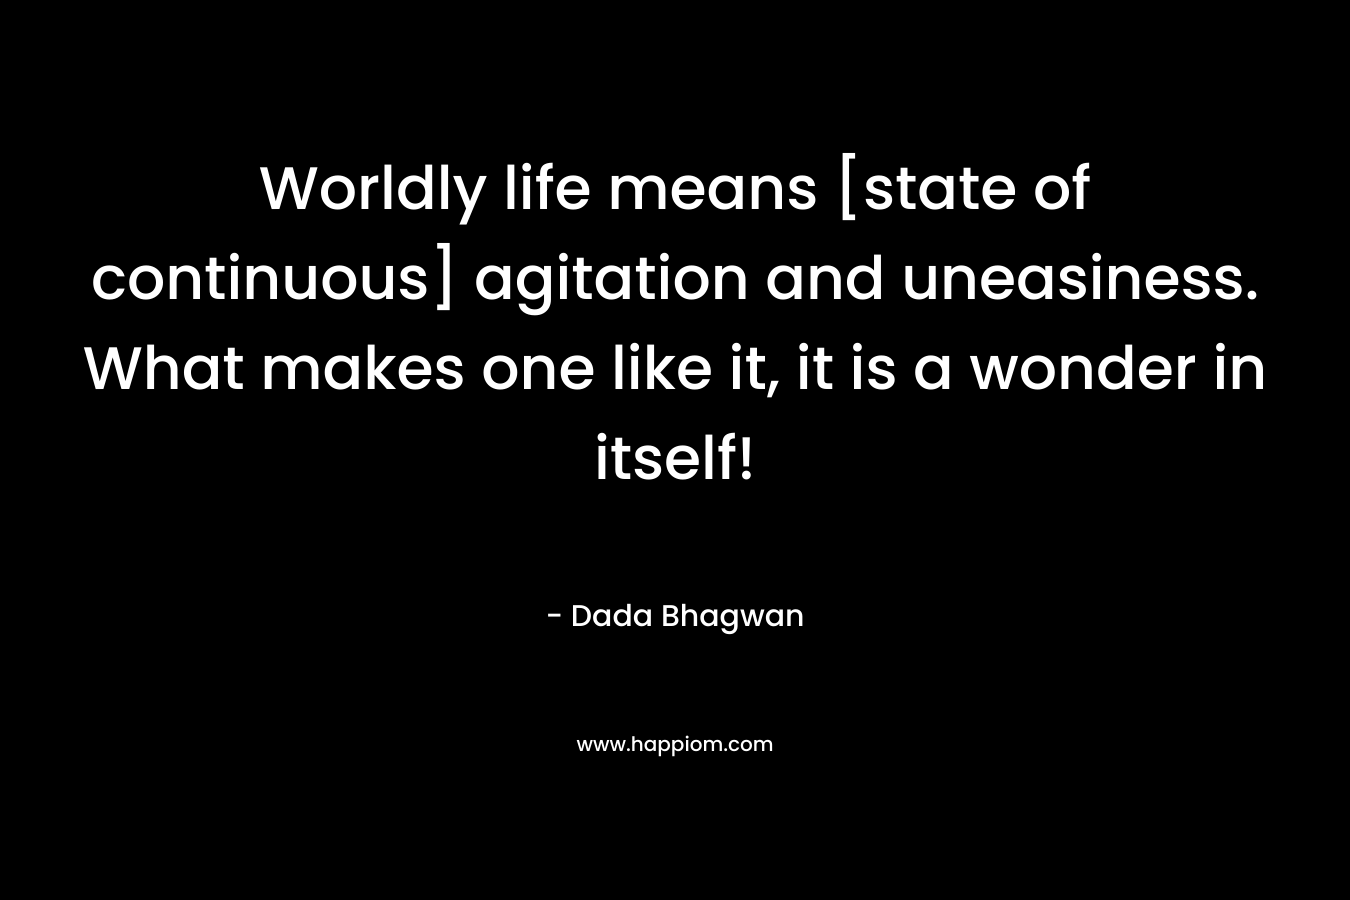 Worldly life means [state of continuous] agitation and uneasiness. What makes one like it, it is a wonder in itself!